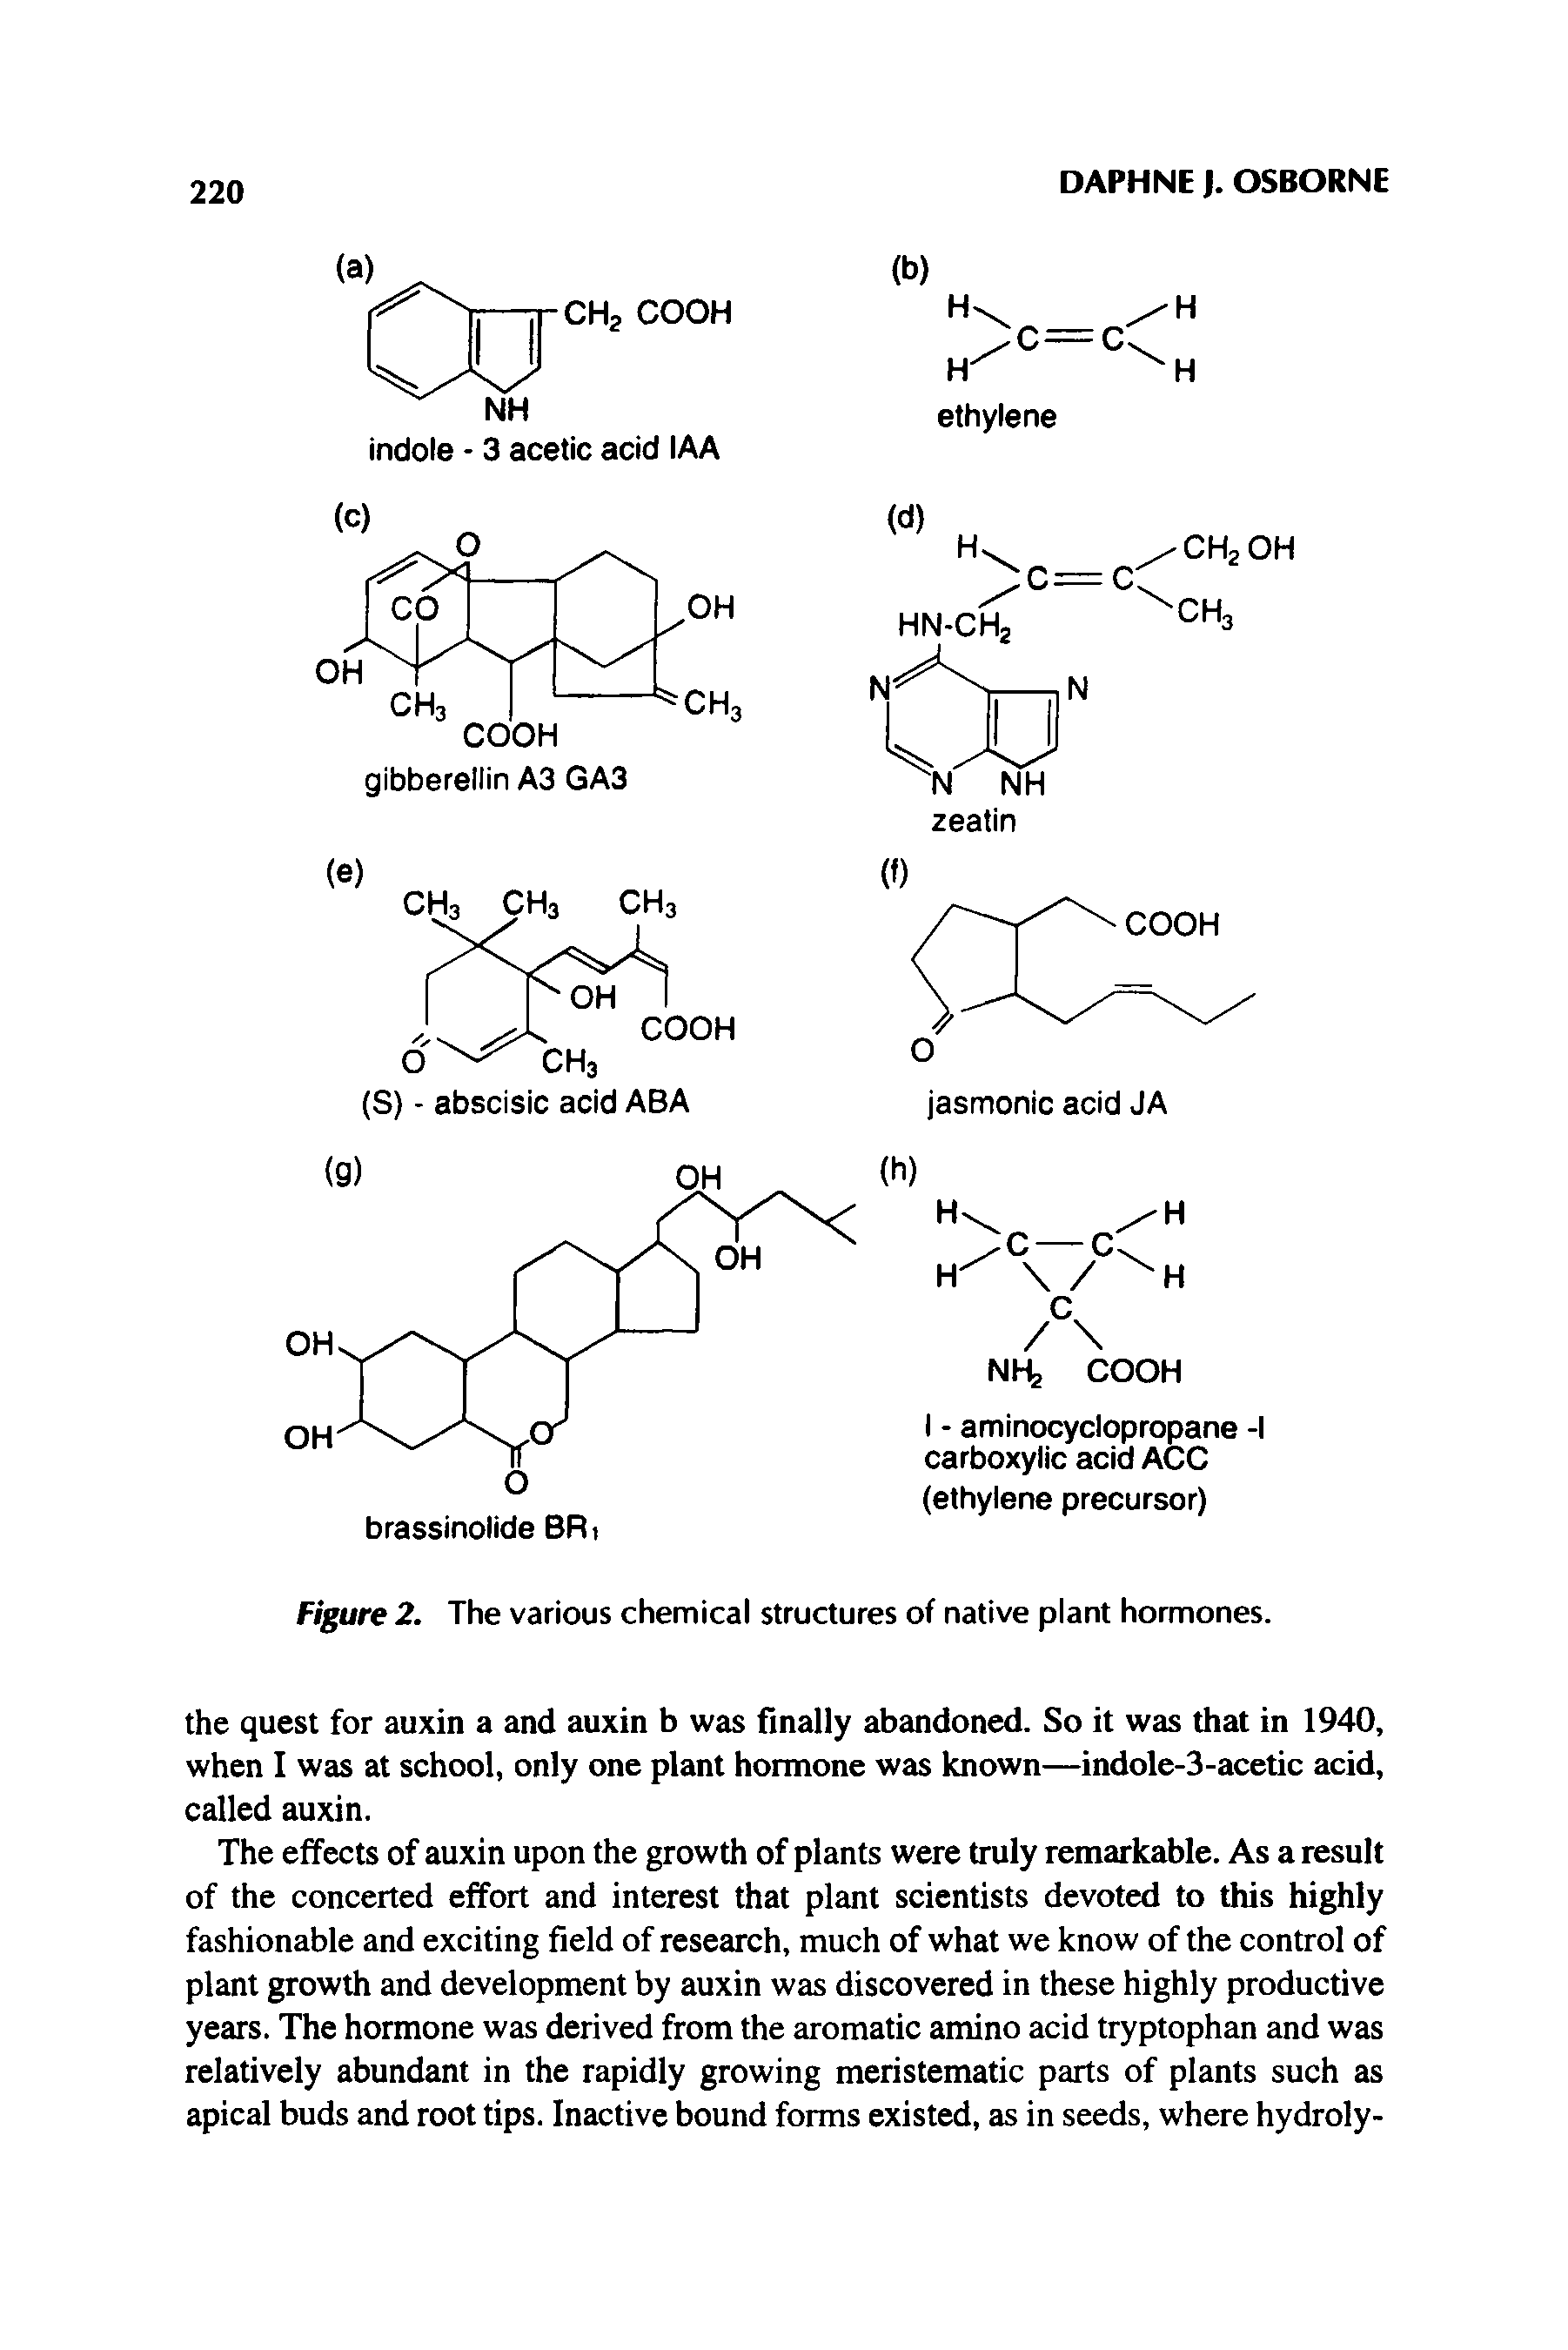 Figure 2. The various chemical structures of native plant hormones.